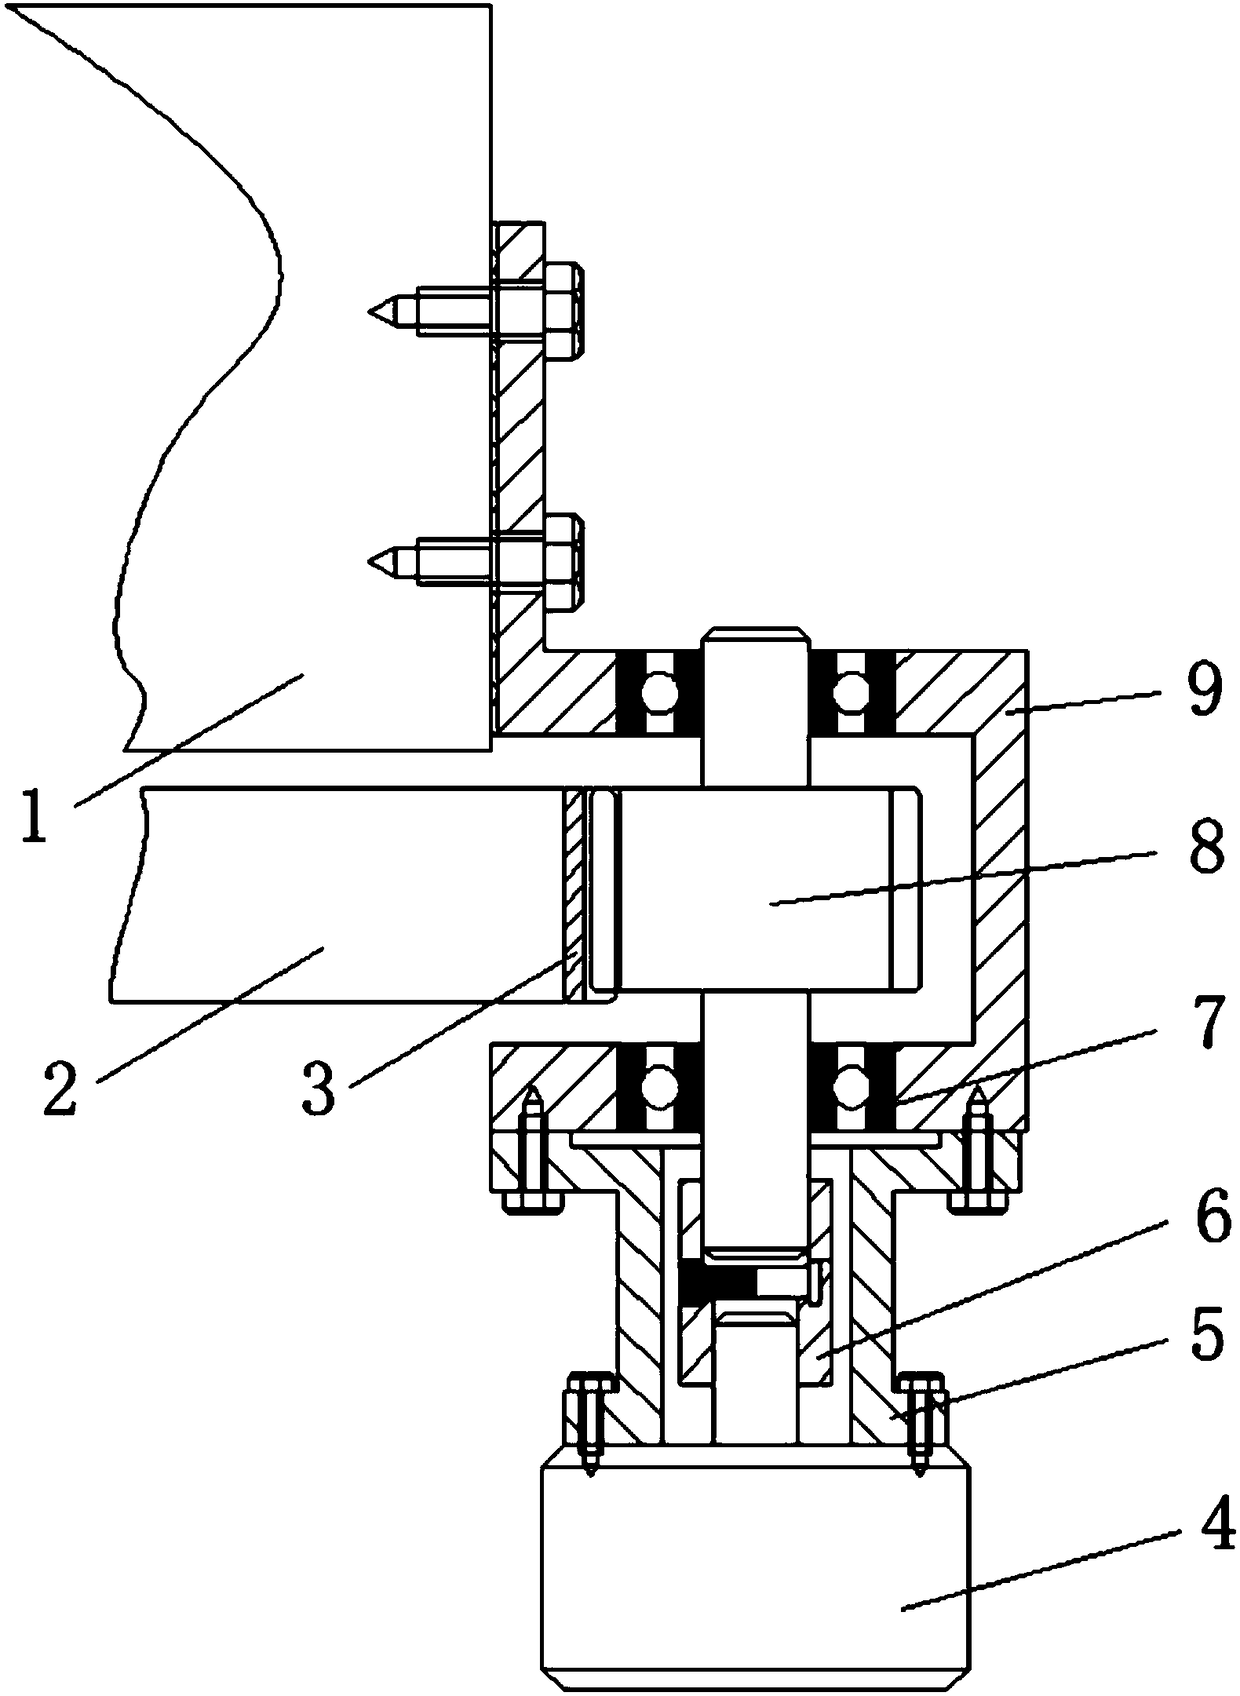 Measuring method used for reciprocating movement